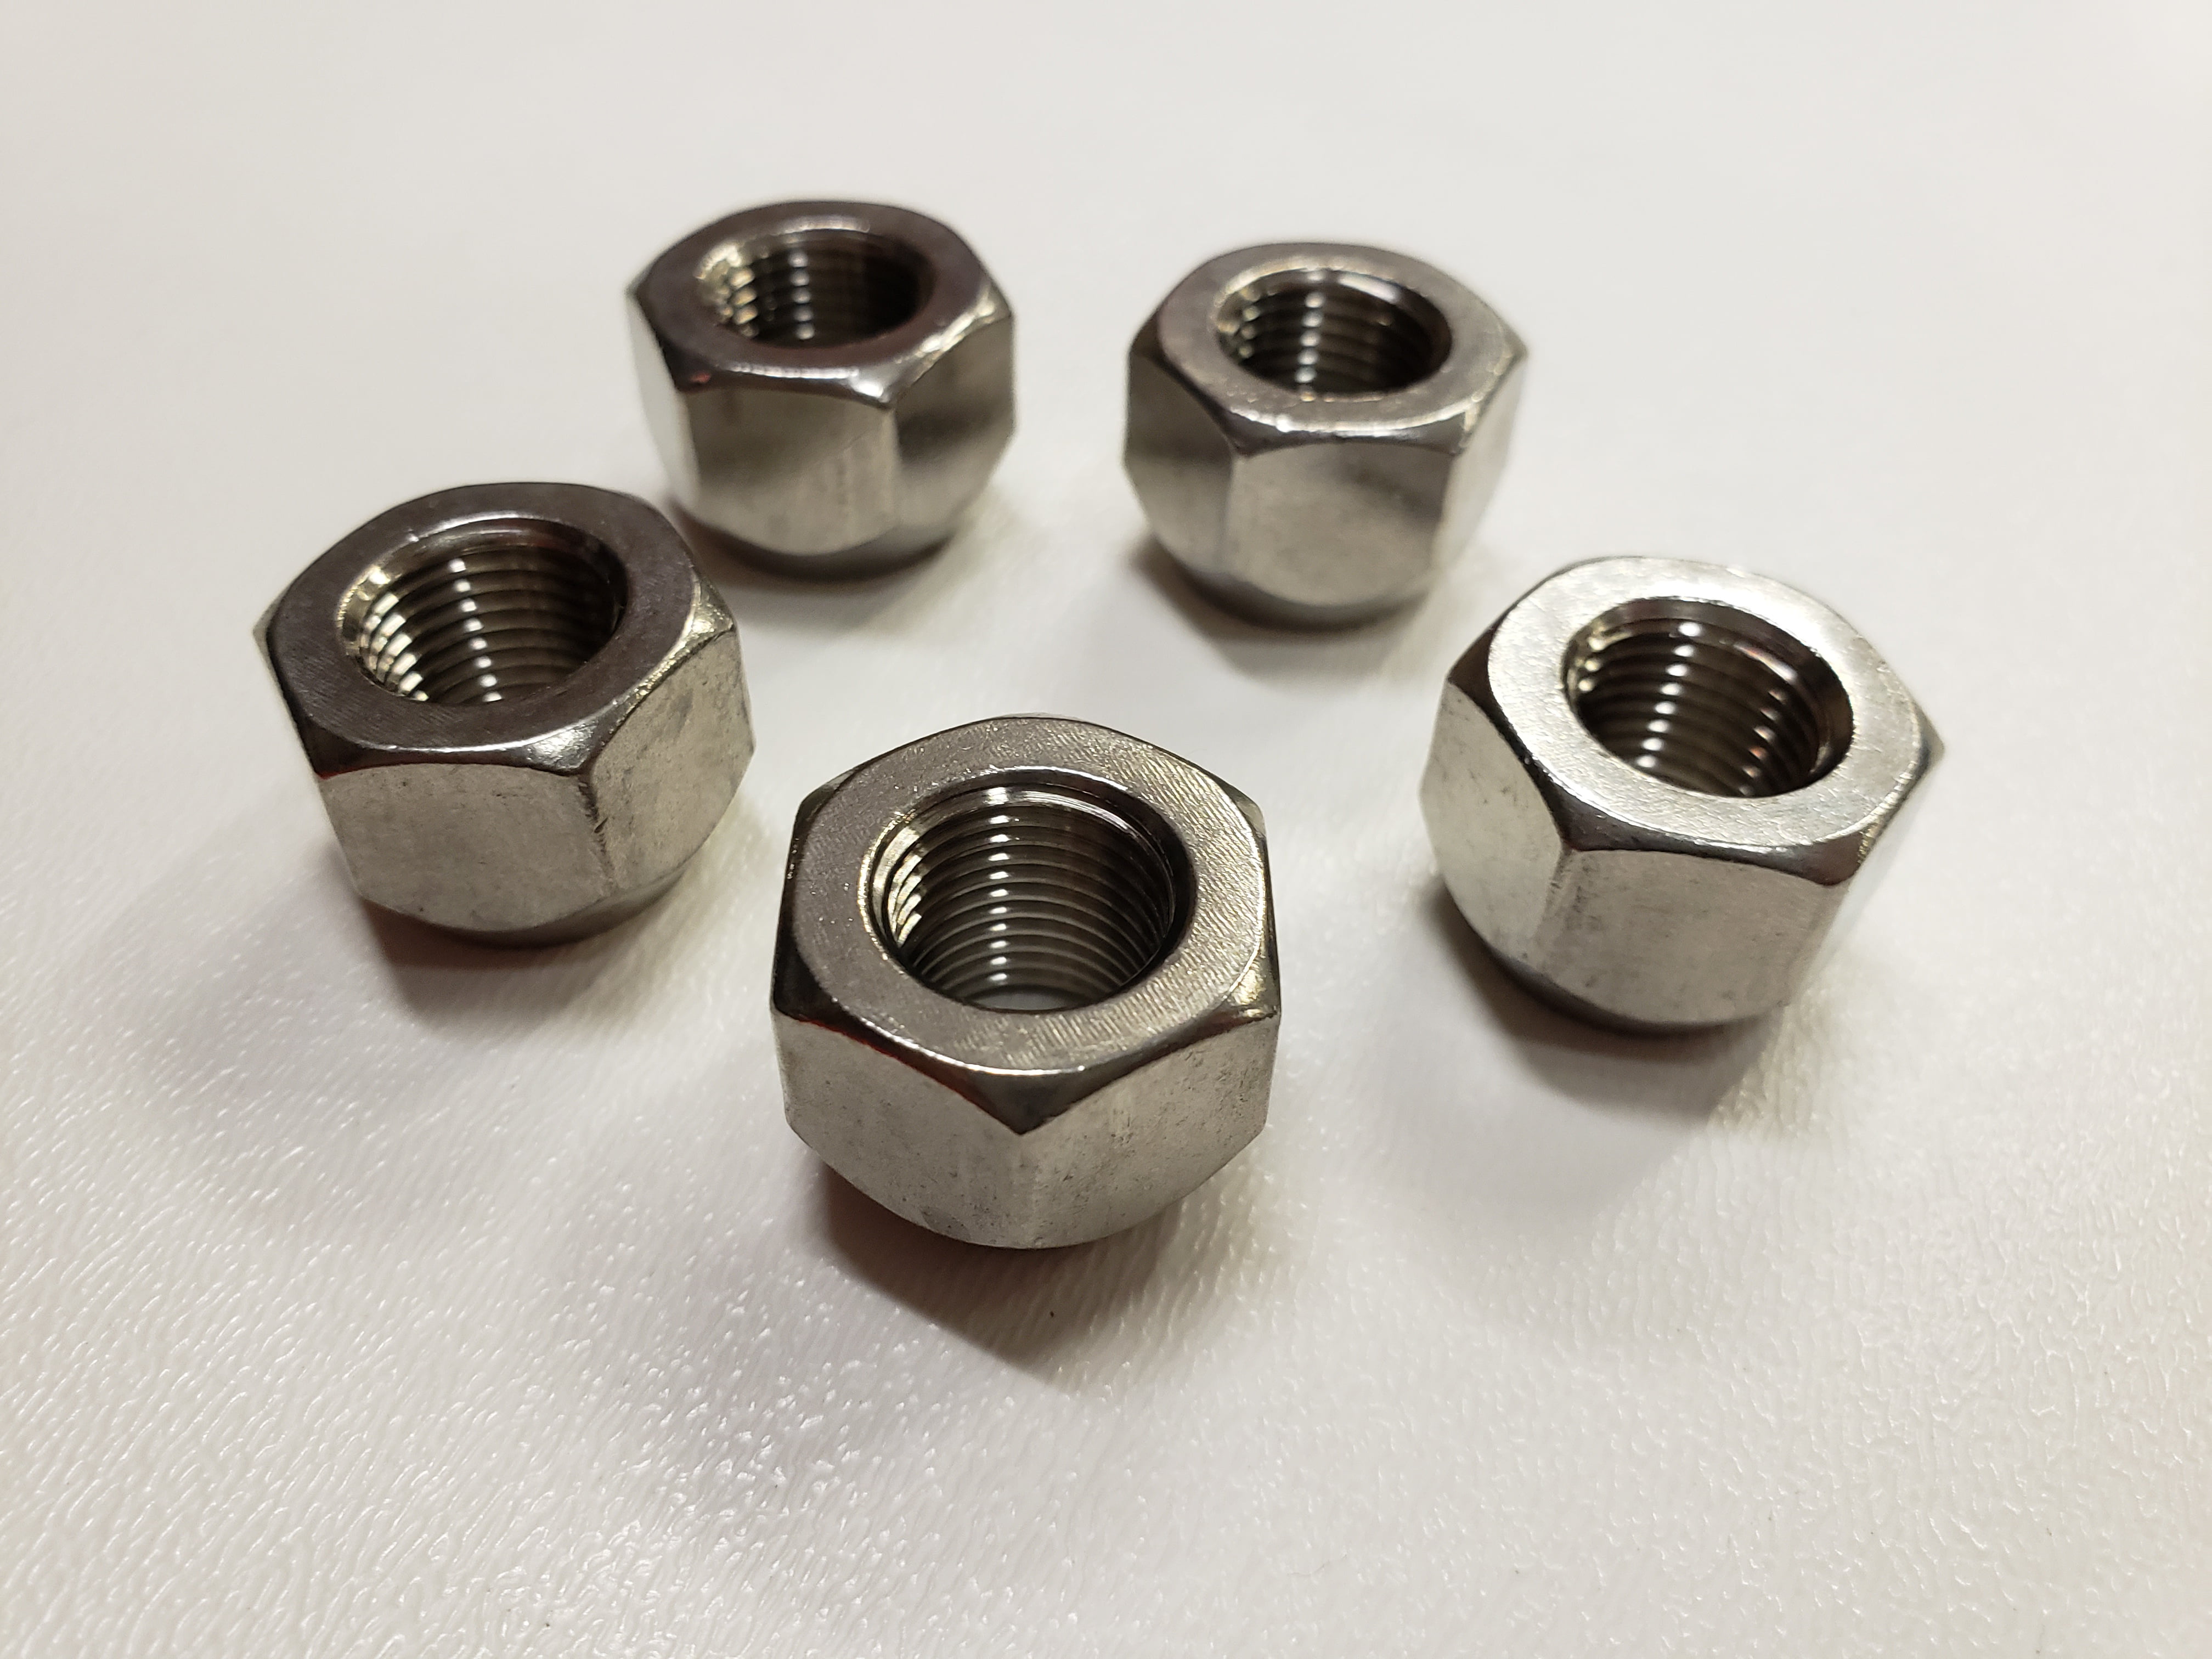 Five (5) Pack Open 304 Stainless Steel 1/2-20 Lug Nuts For Trailer Stainless Steel Lug Nuts 1 2 X 20